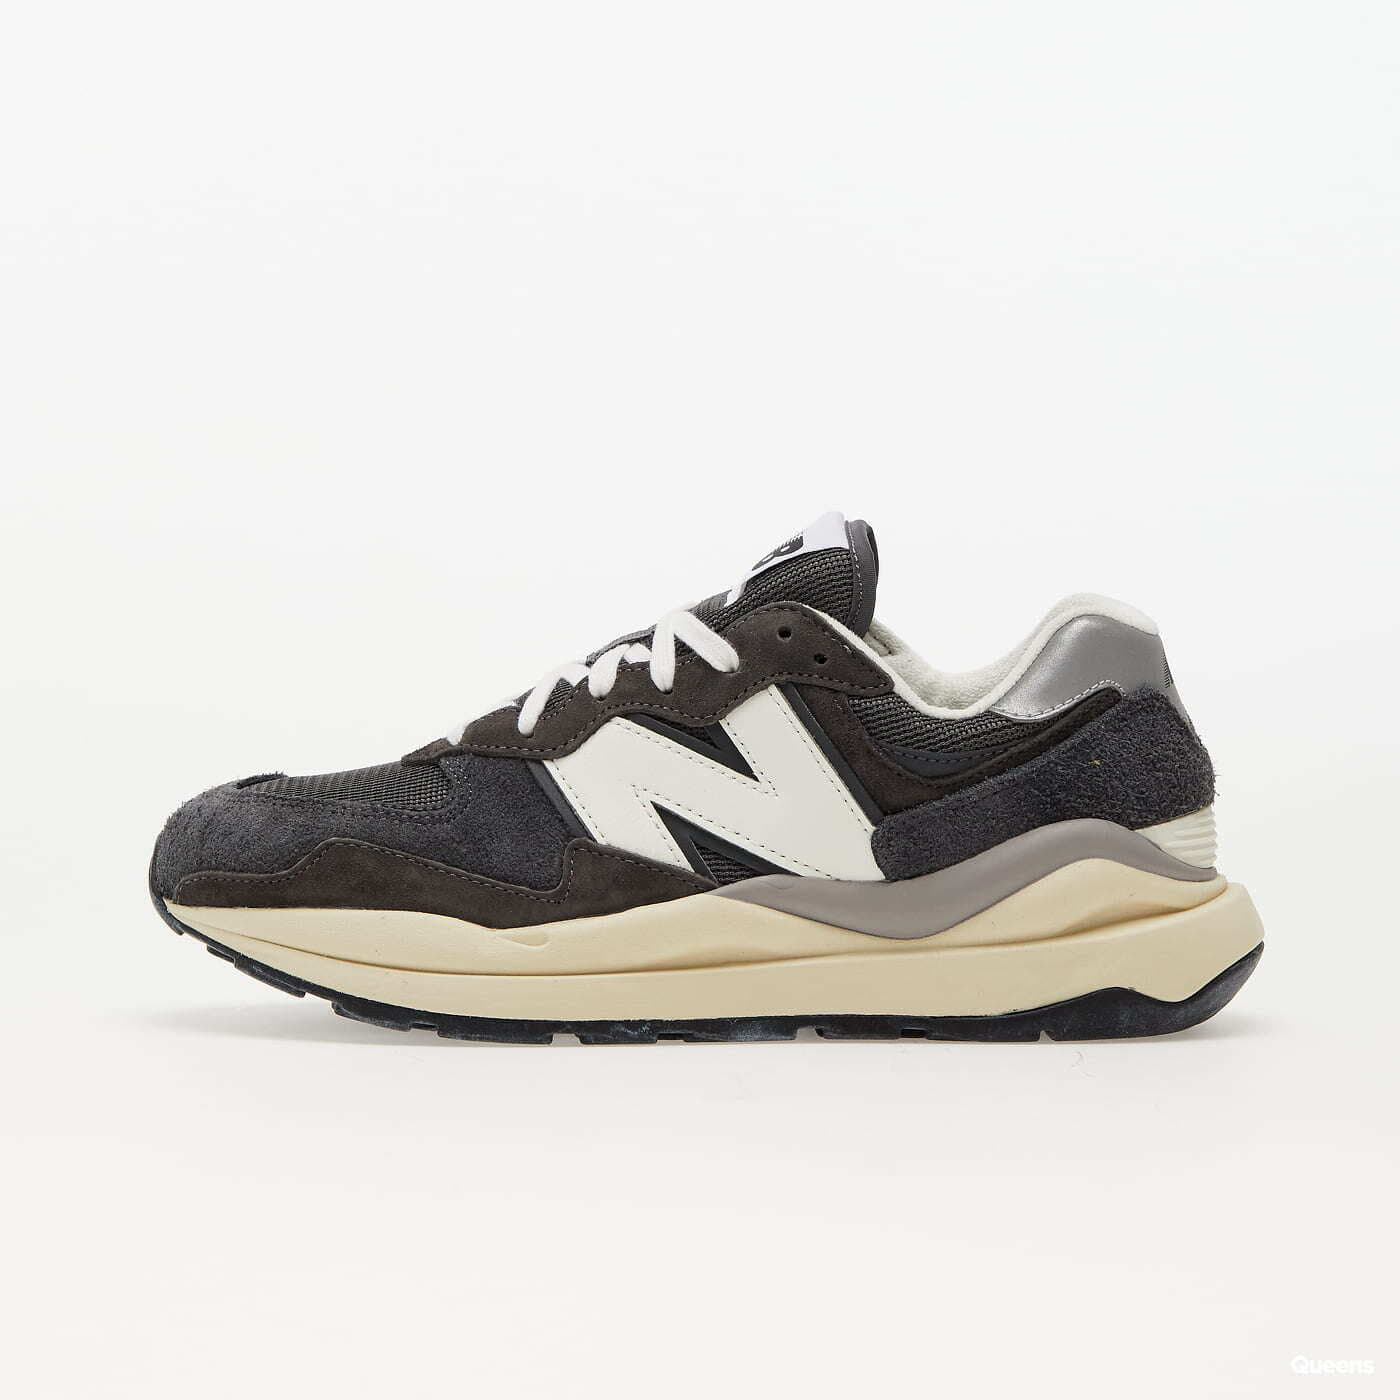 Men's sneakers and shoes New Balance 5740 Sea Salt/ Black